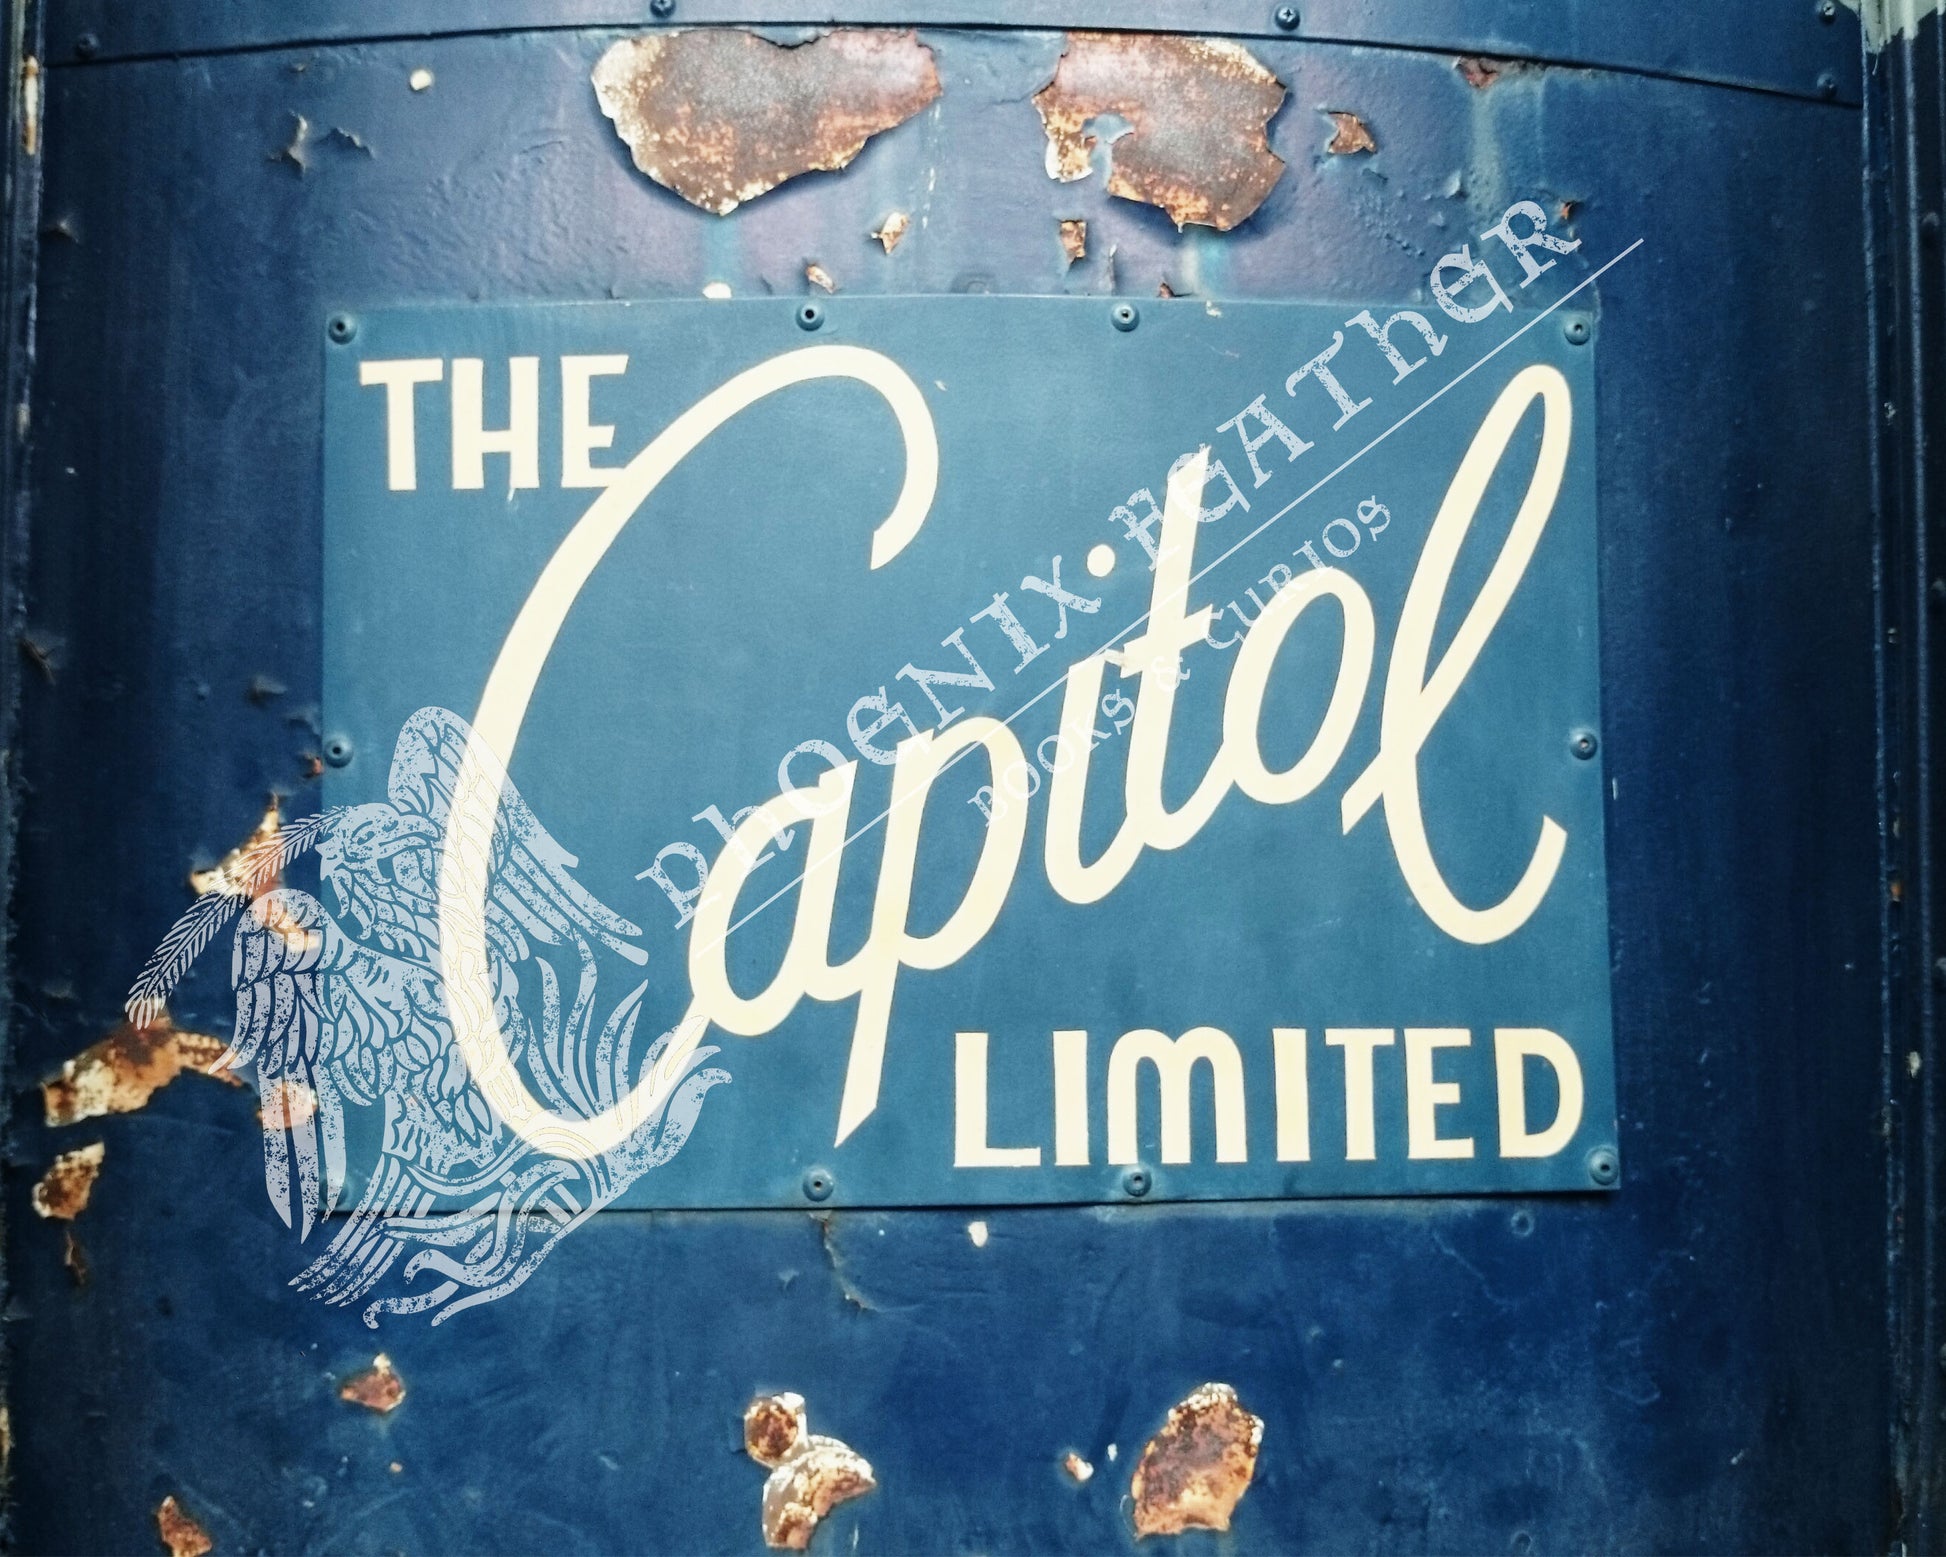 Travel photography for sale.  Gifts for history lovers and travelers. Color photograph of The Capitol Limited name plate on the train at the B & O Railroad Museum in Baltimore, Maryland.